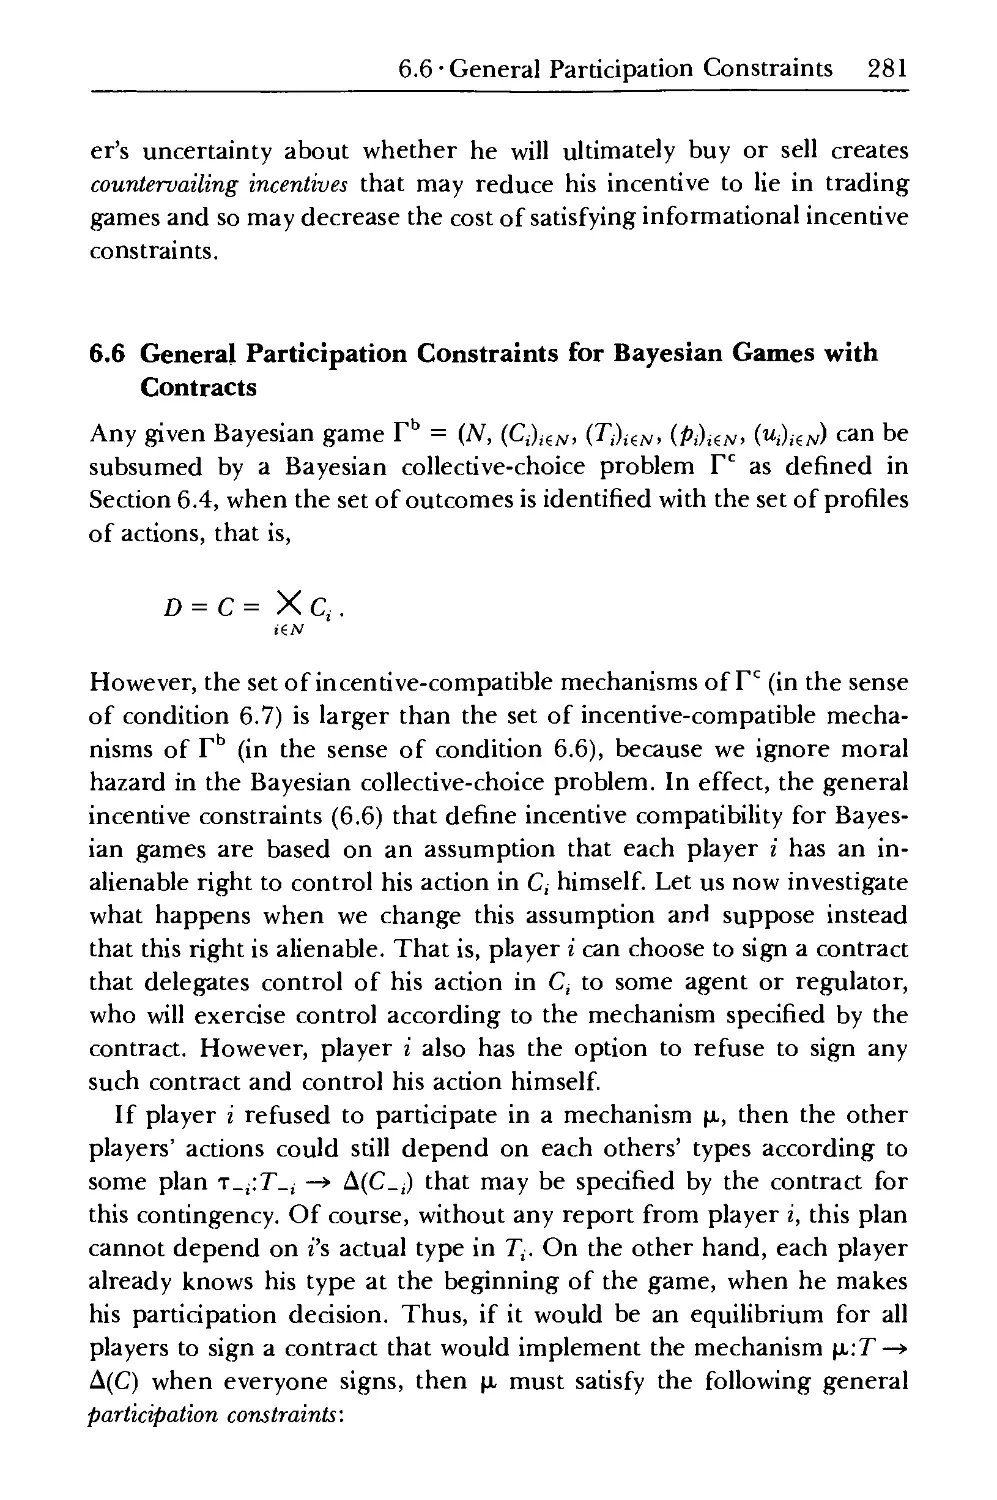 6.6 General Participation Constraints for Bayesian Games with Contracts